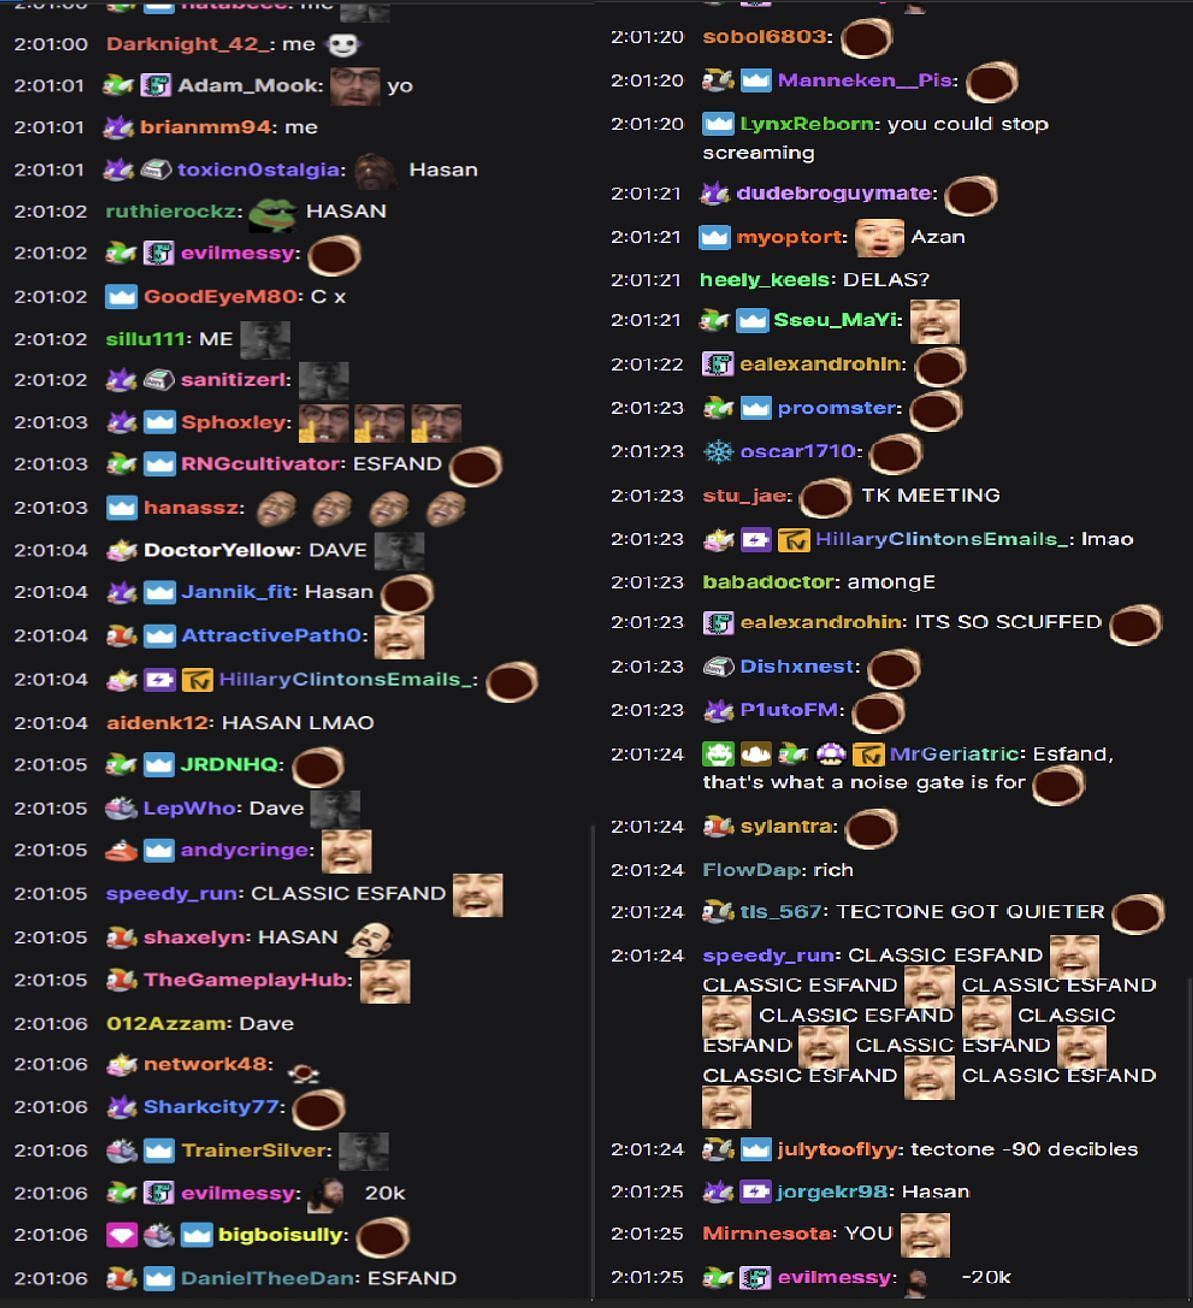 Twitch chat&#039;s reaction towards Matthew&#039;s diss against Esfand&#039;s audio (Images via Twitch)